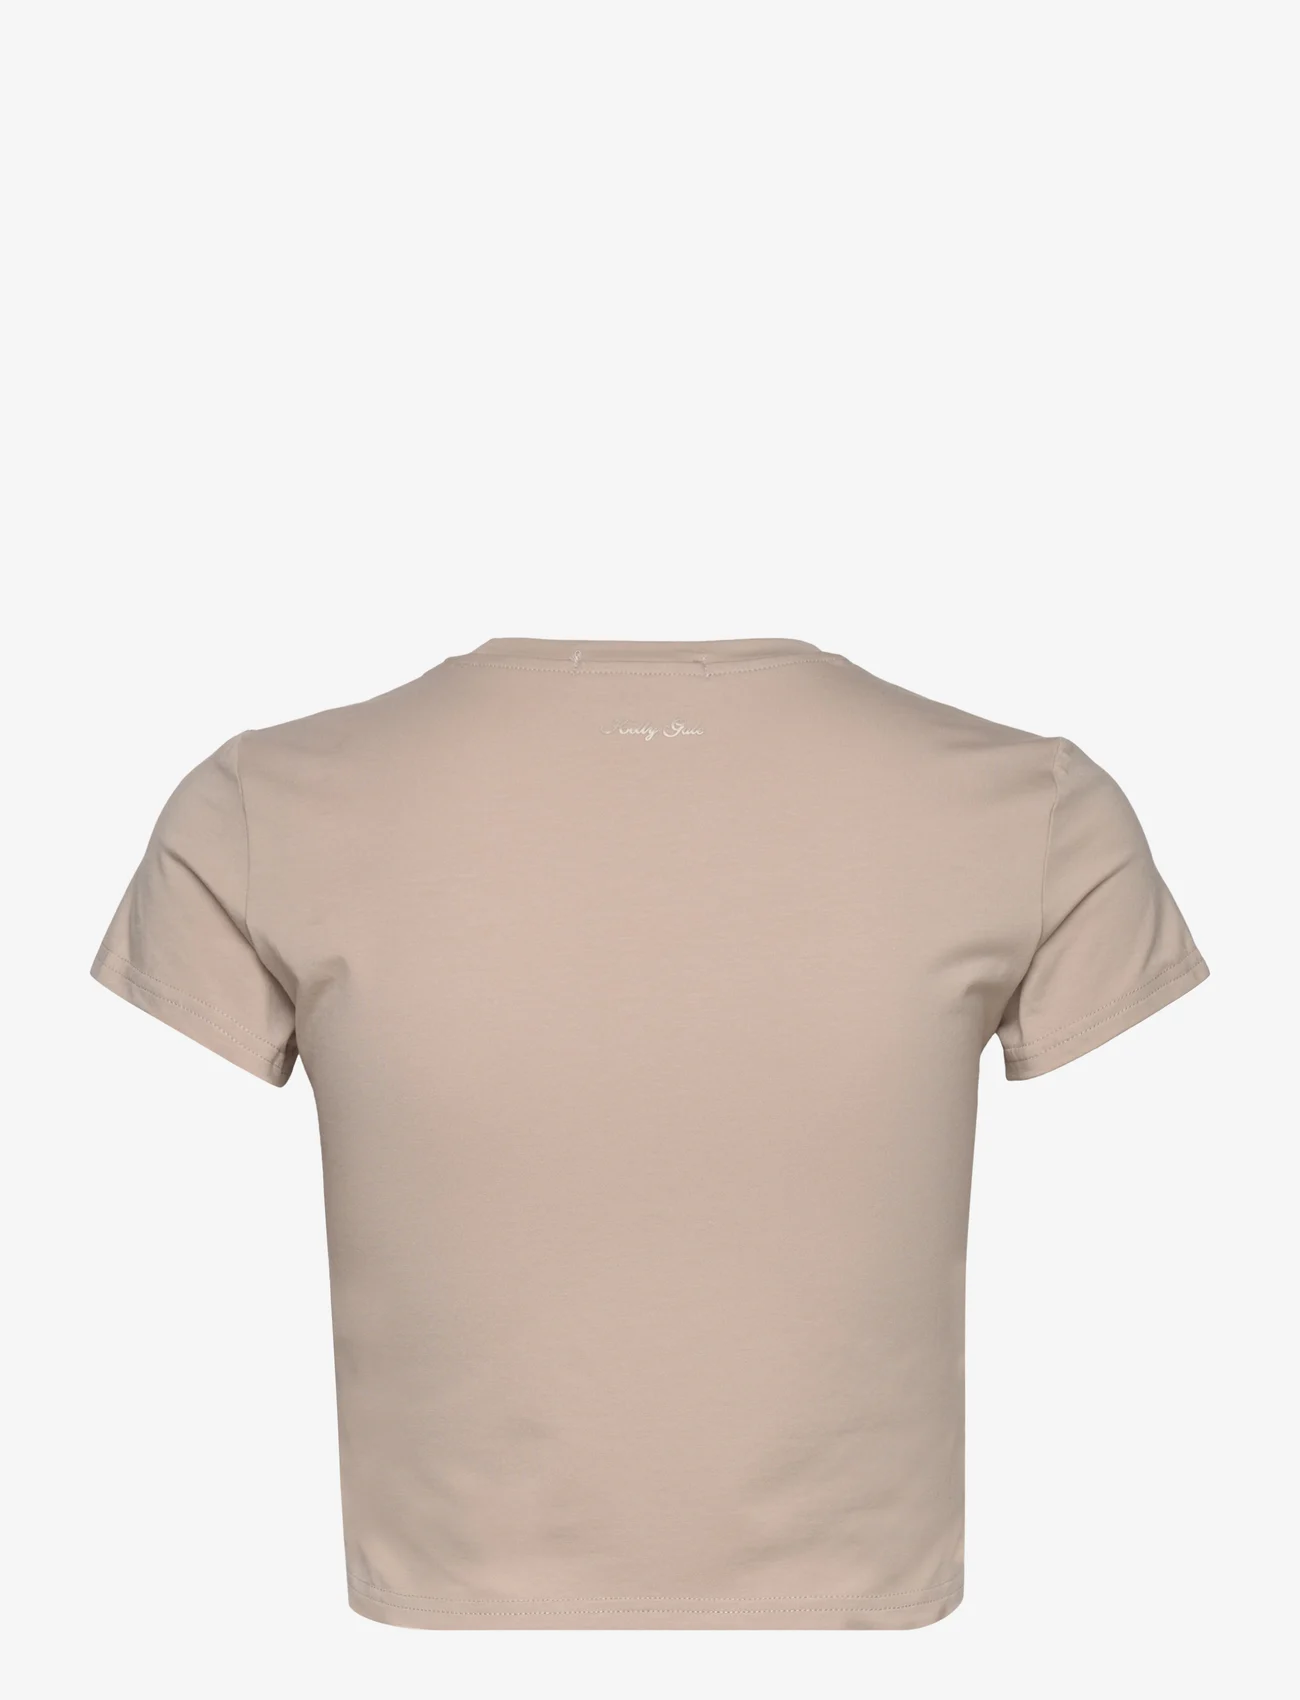 RS Sports - Kelly Top - t-shirts - beige sand - 1